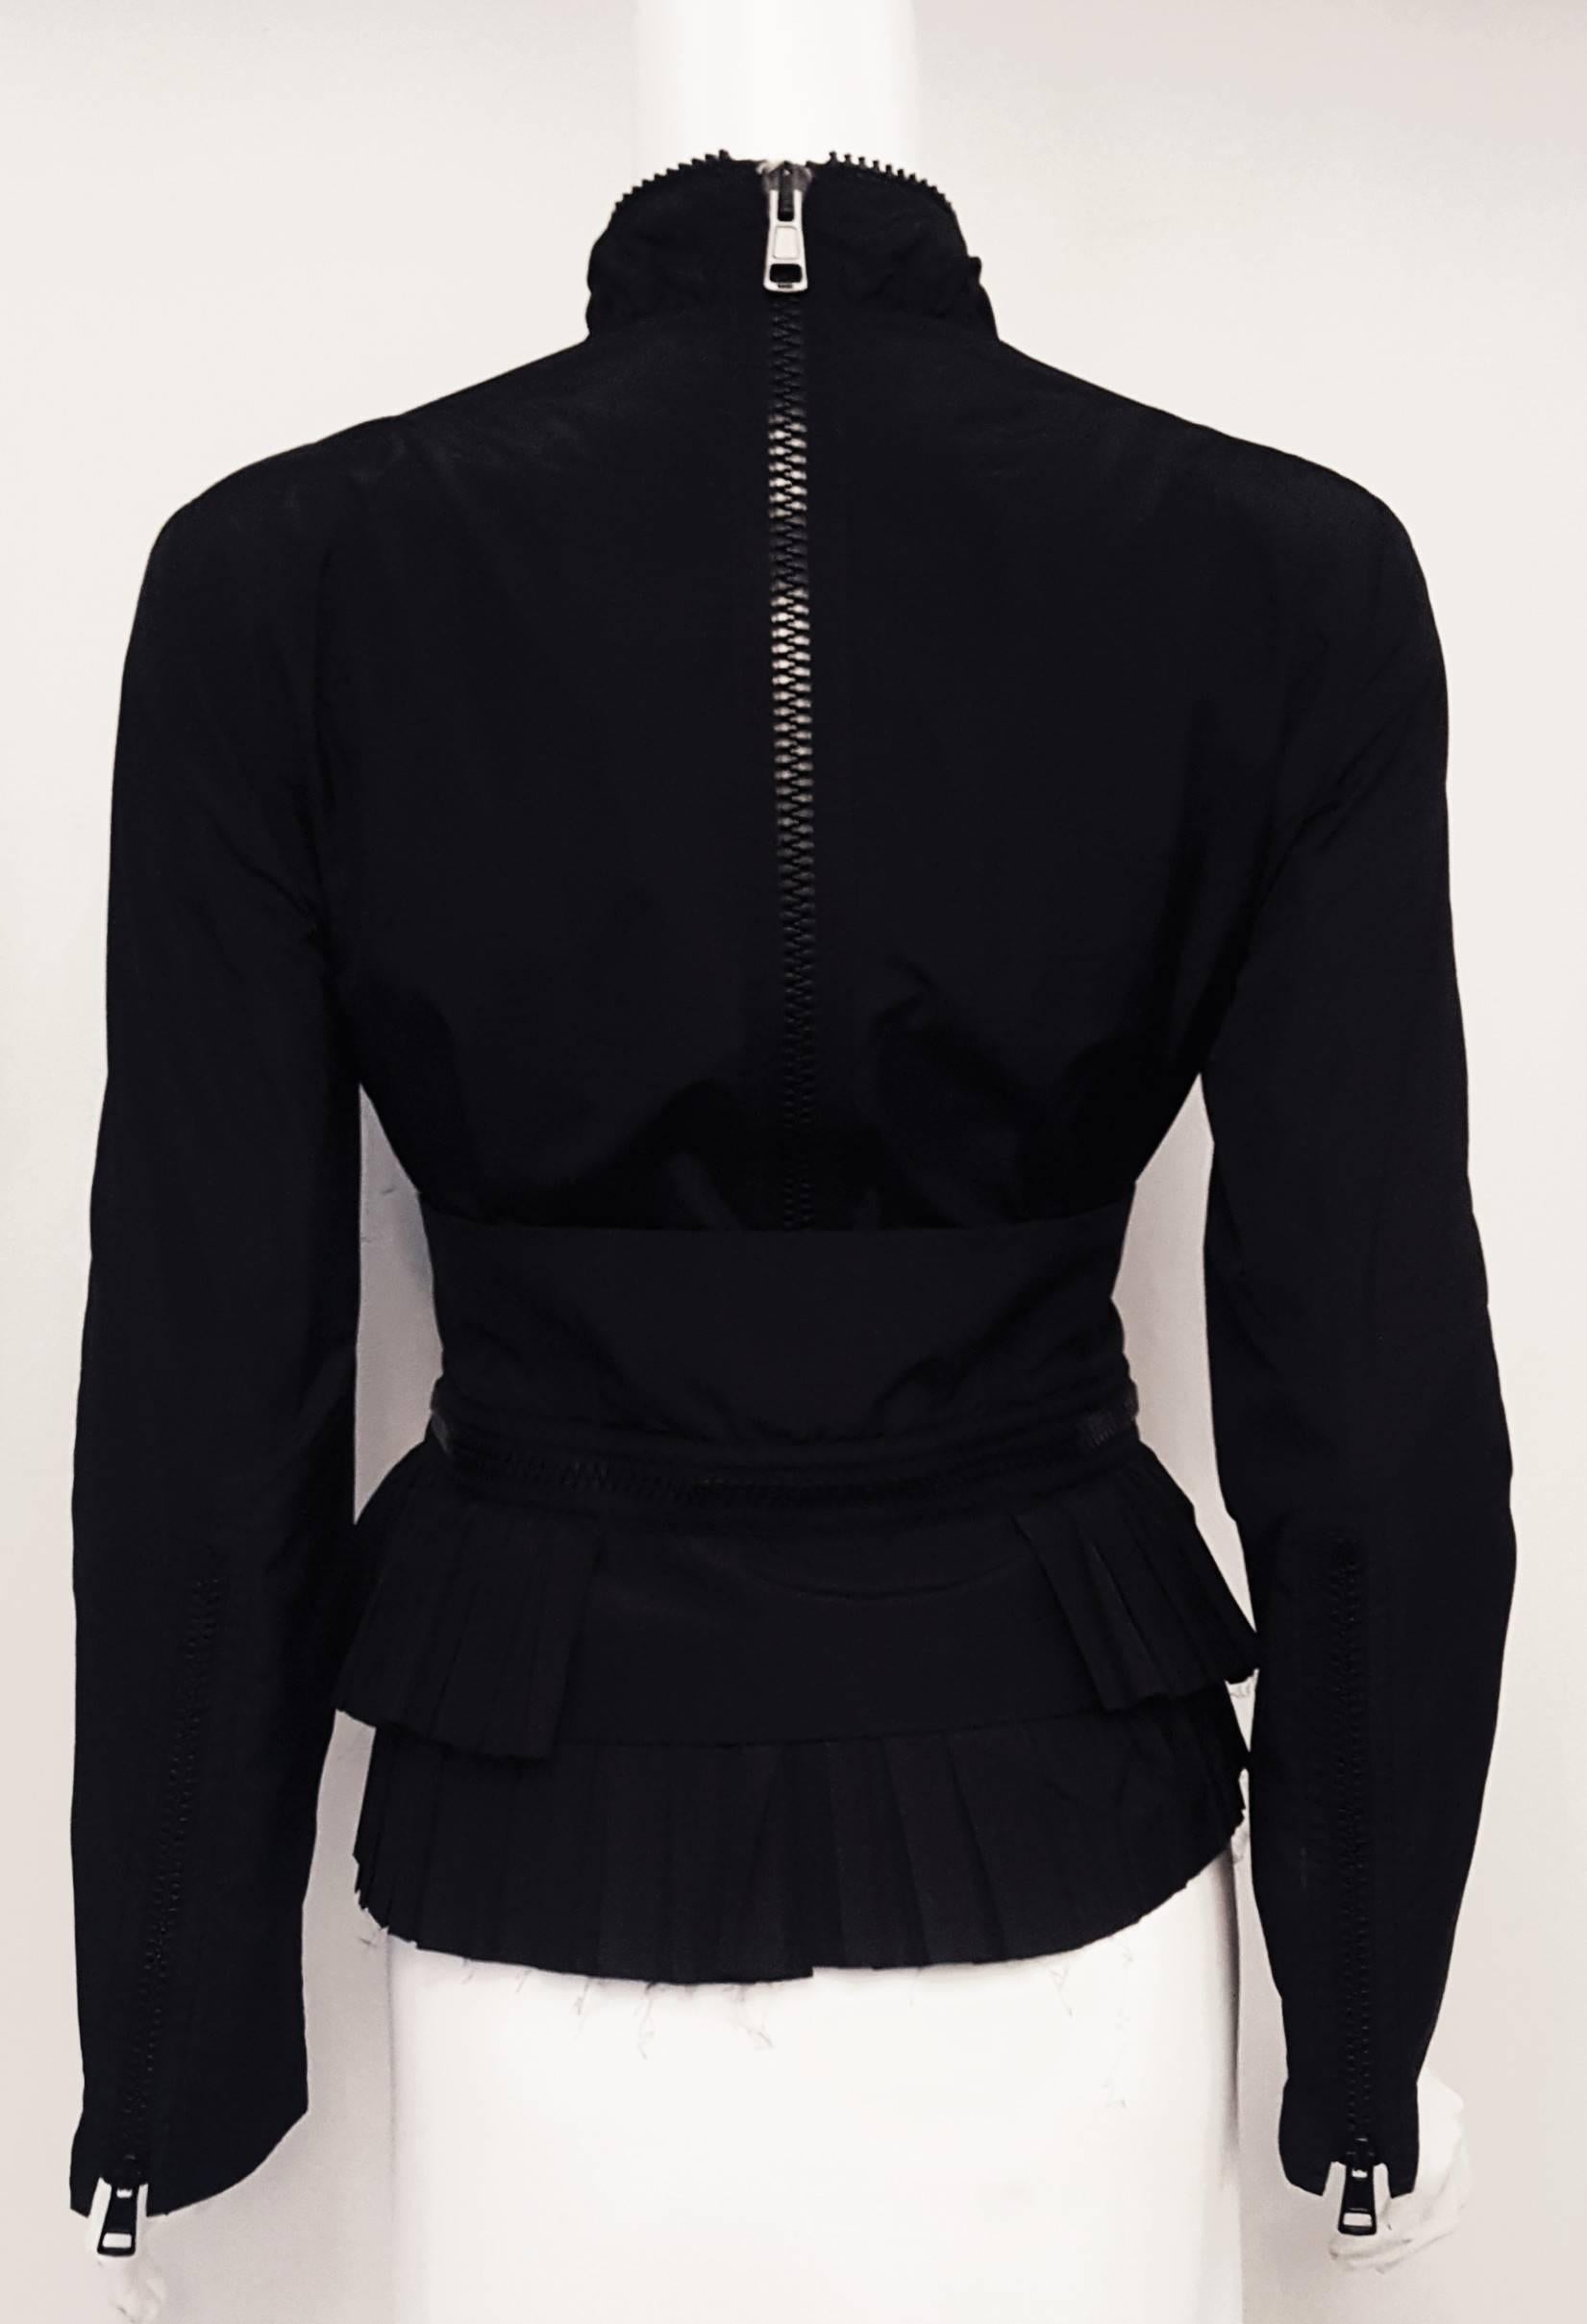 Givenchy Black Pleated Jacket with Multiple Zippers at Waist / Collar / Front 2